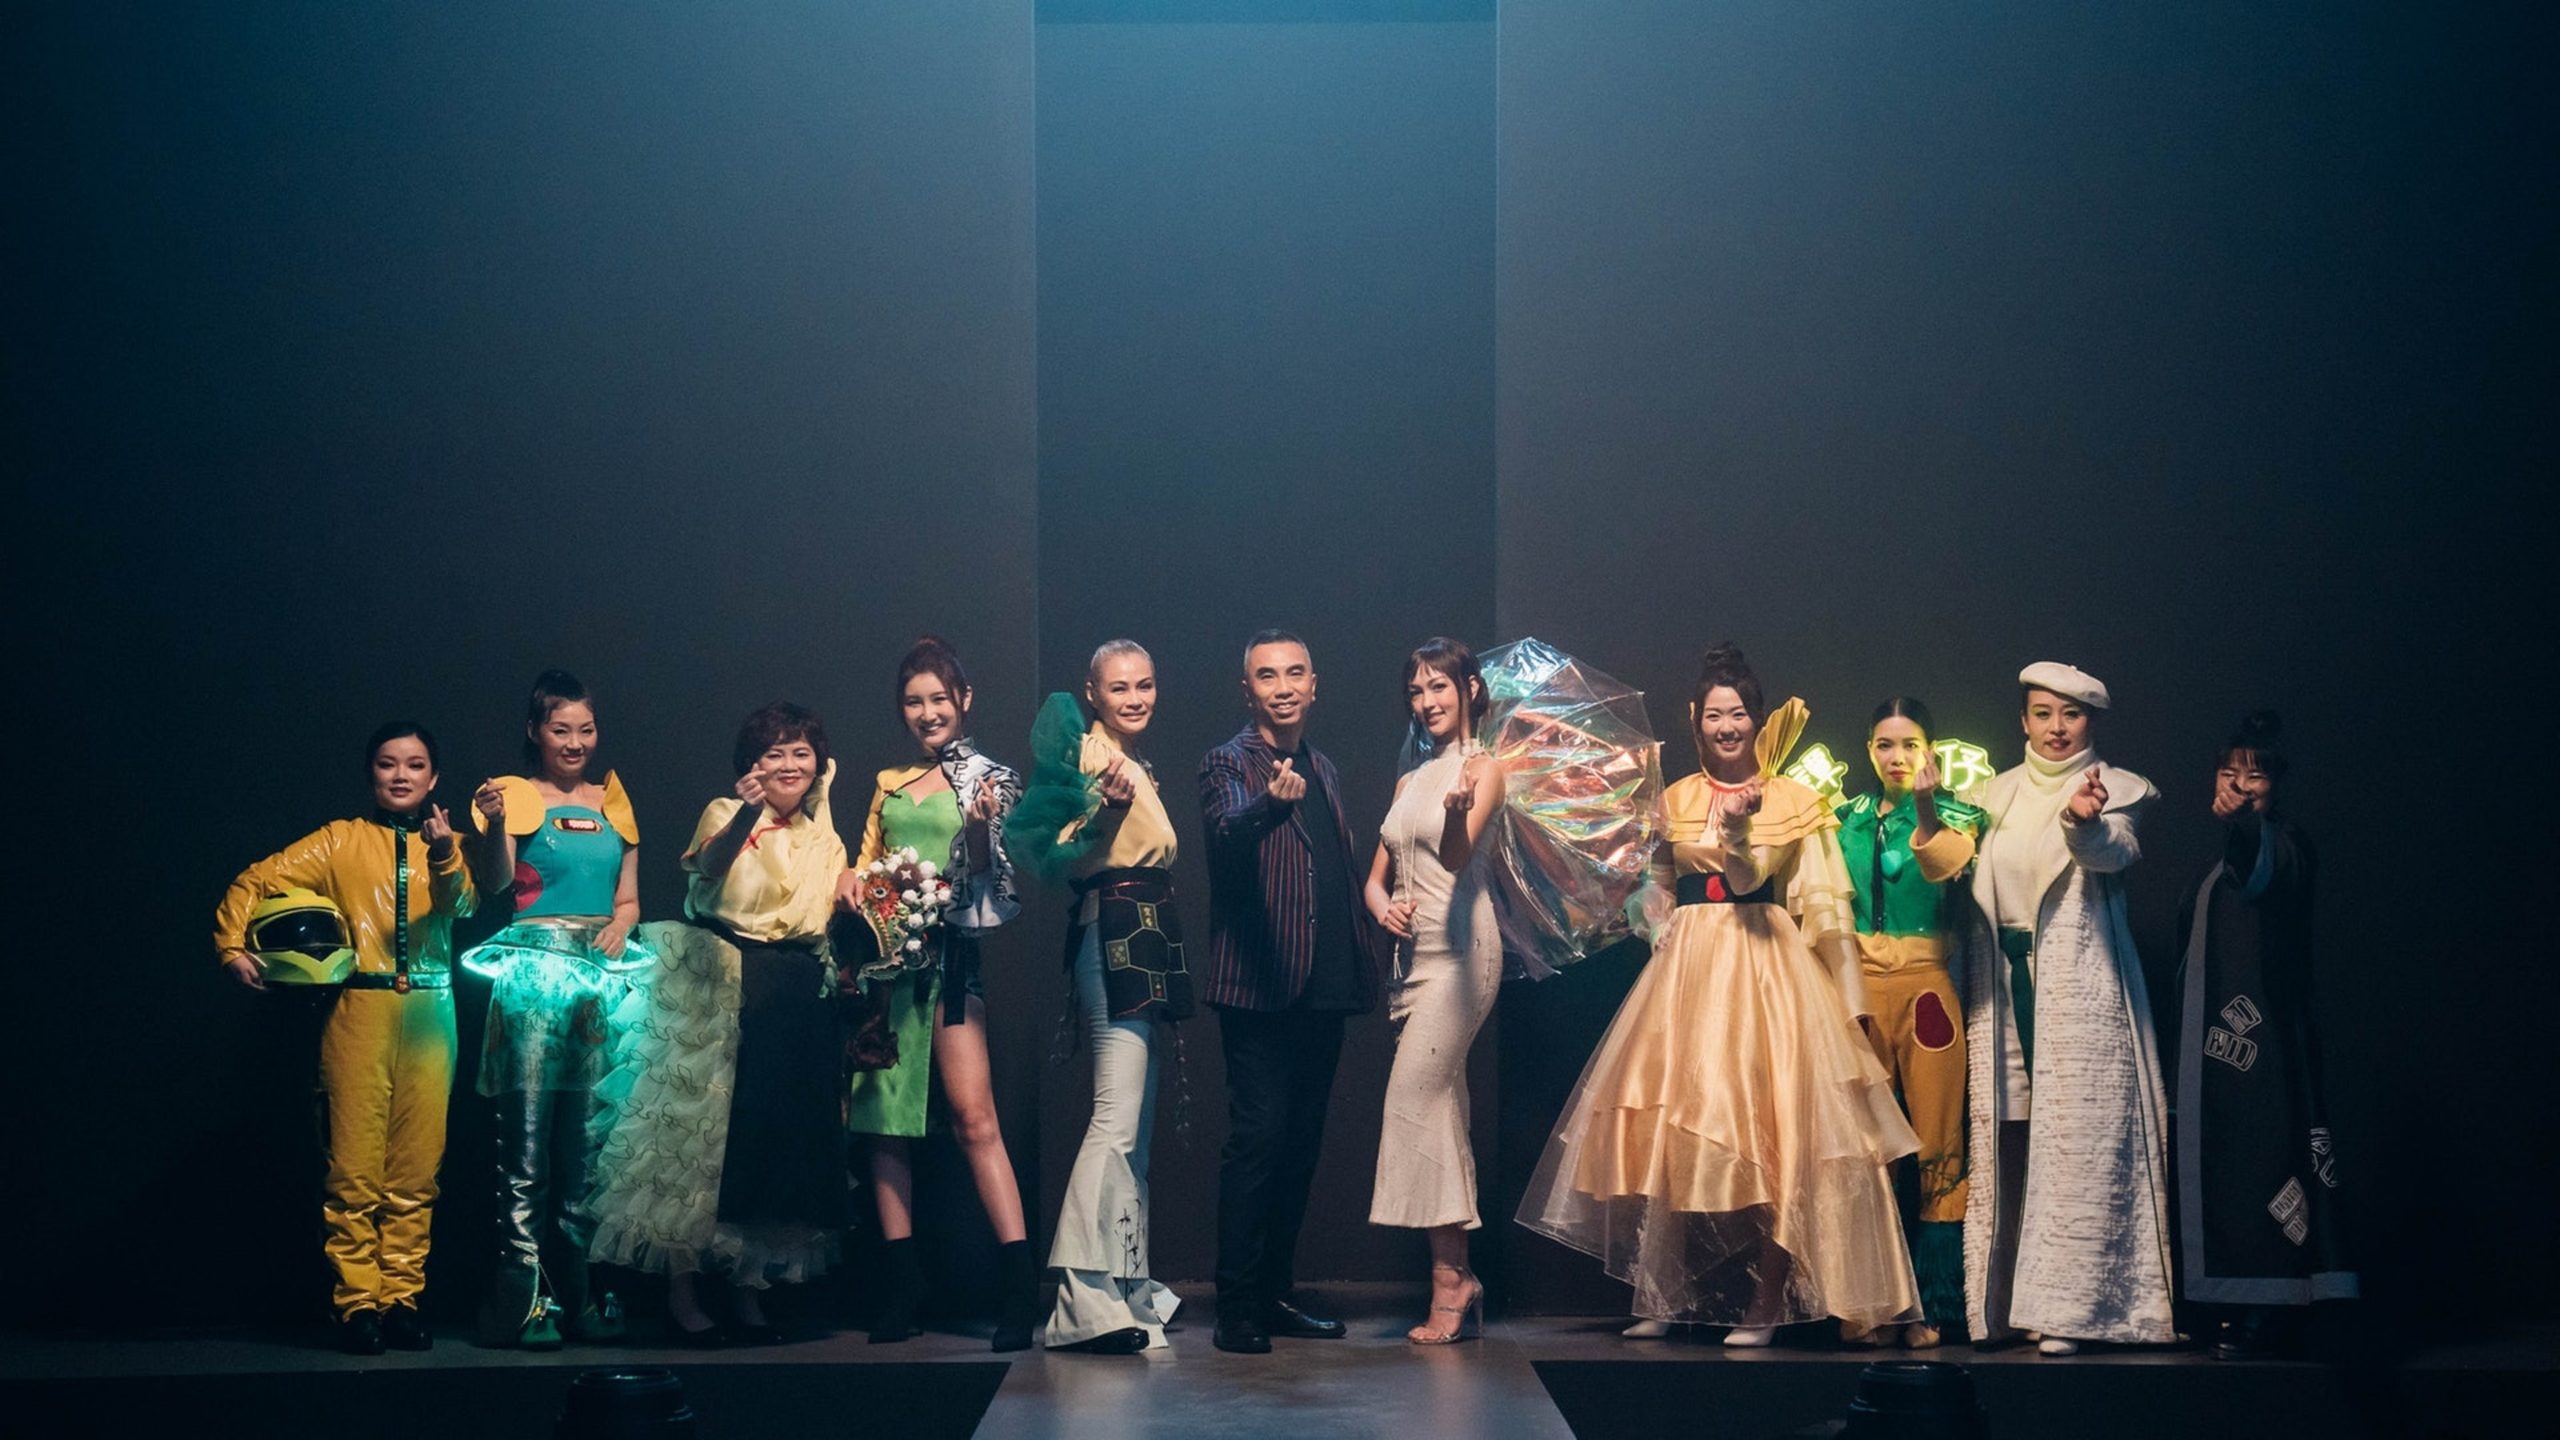 Tam Jai recently engaged the students of HKDI to design their uniforms for 25 years later (year 2046). At the fashion show, Daren joined the finale dressed as a “fashion godfather”, embodying the brand’s bold and playful spirit.